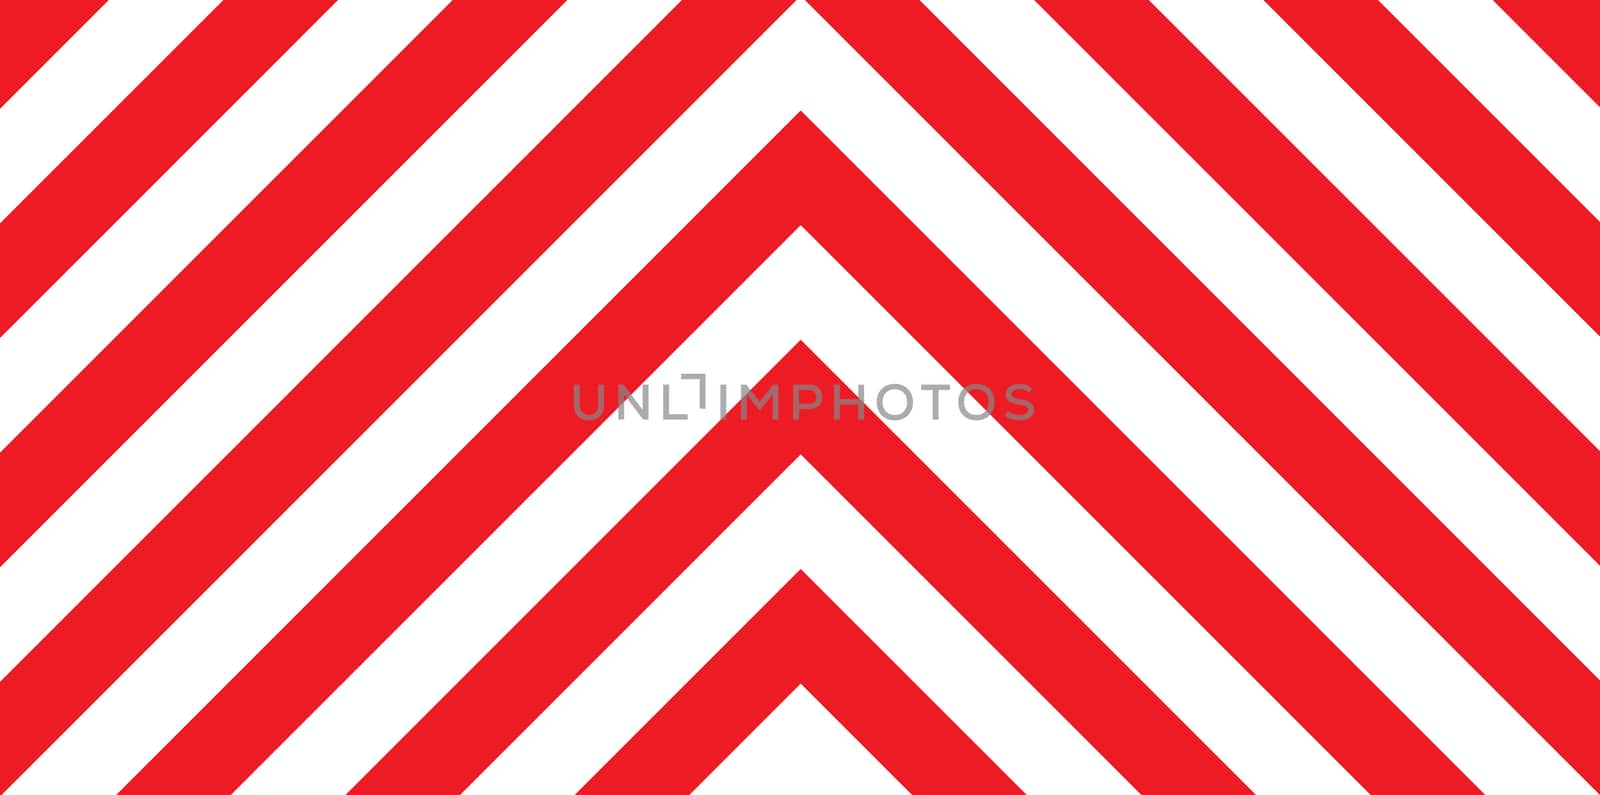 A red and white chevron vehicle background